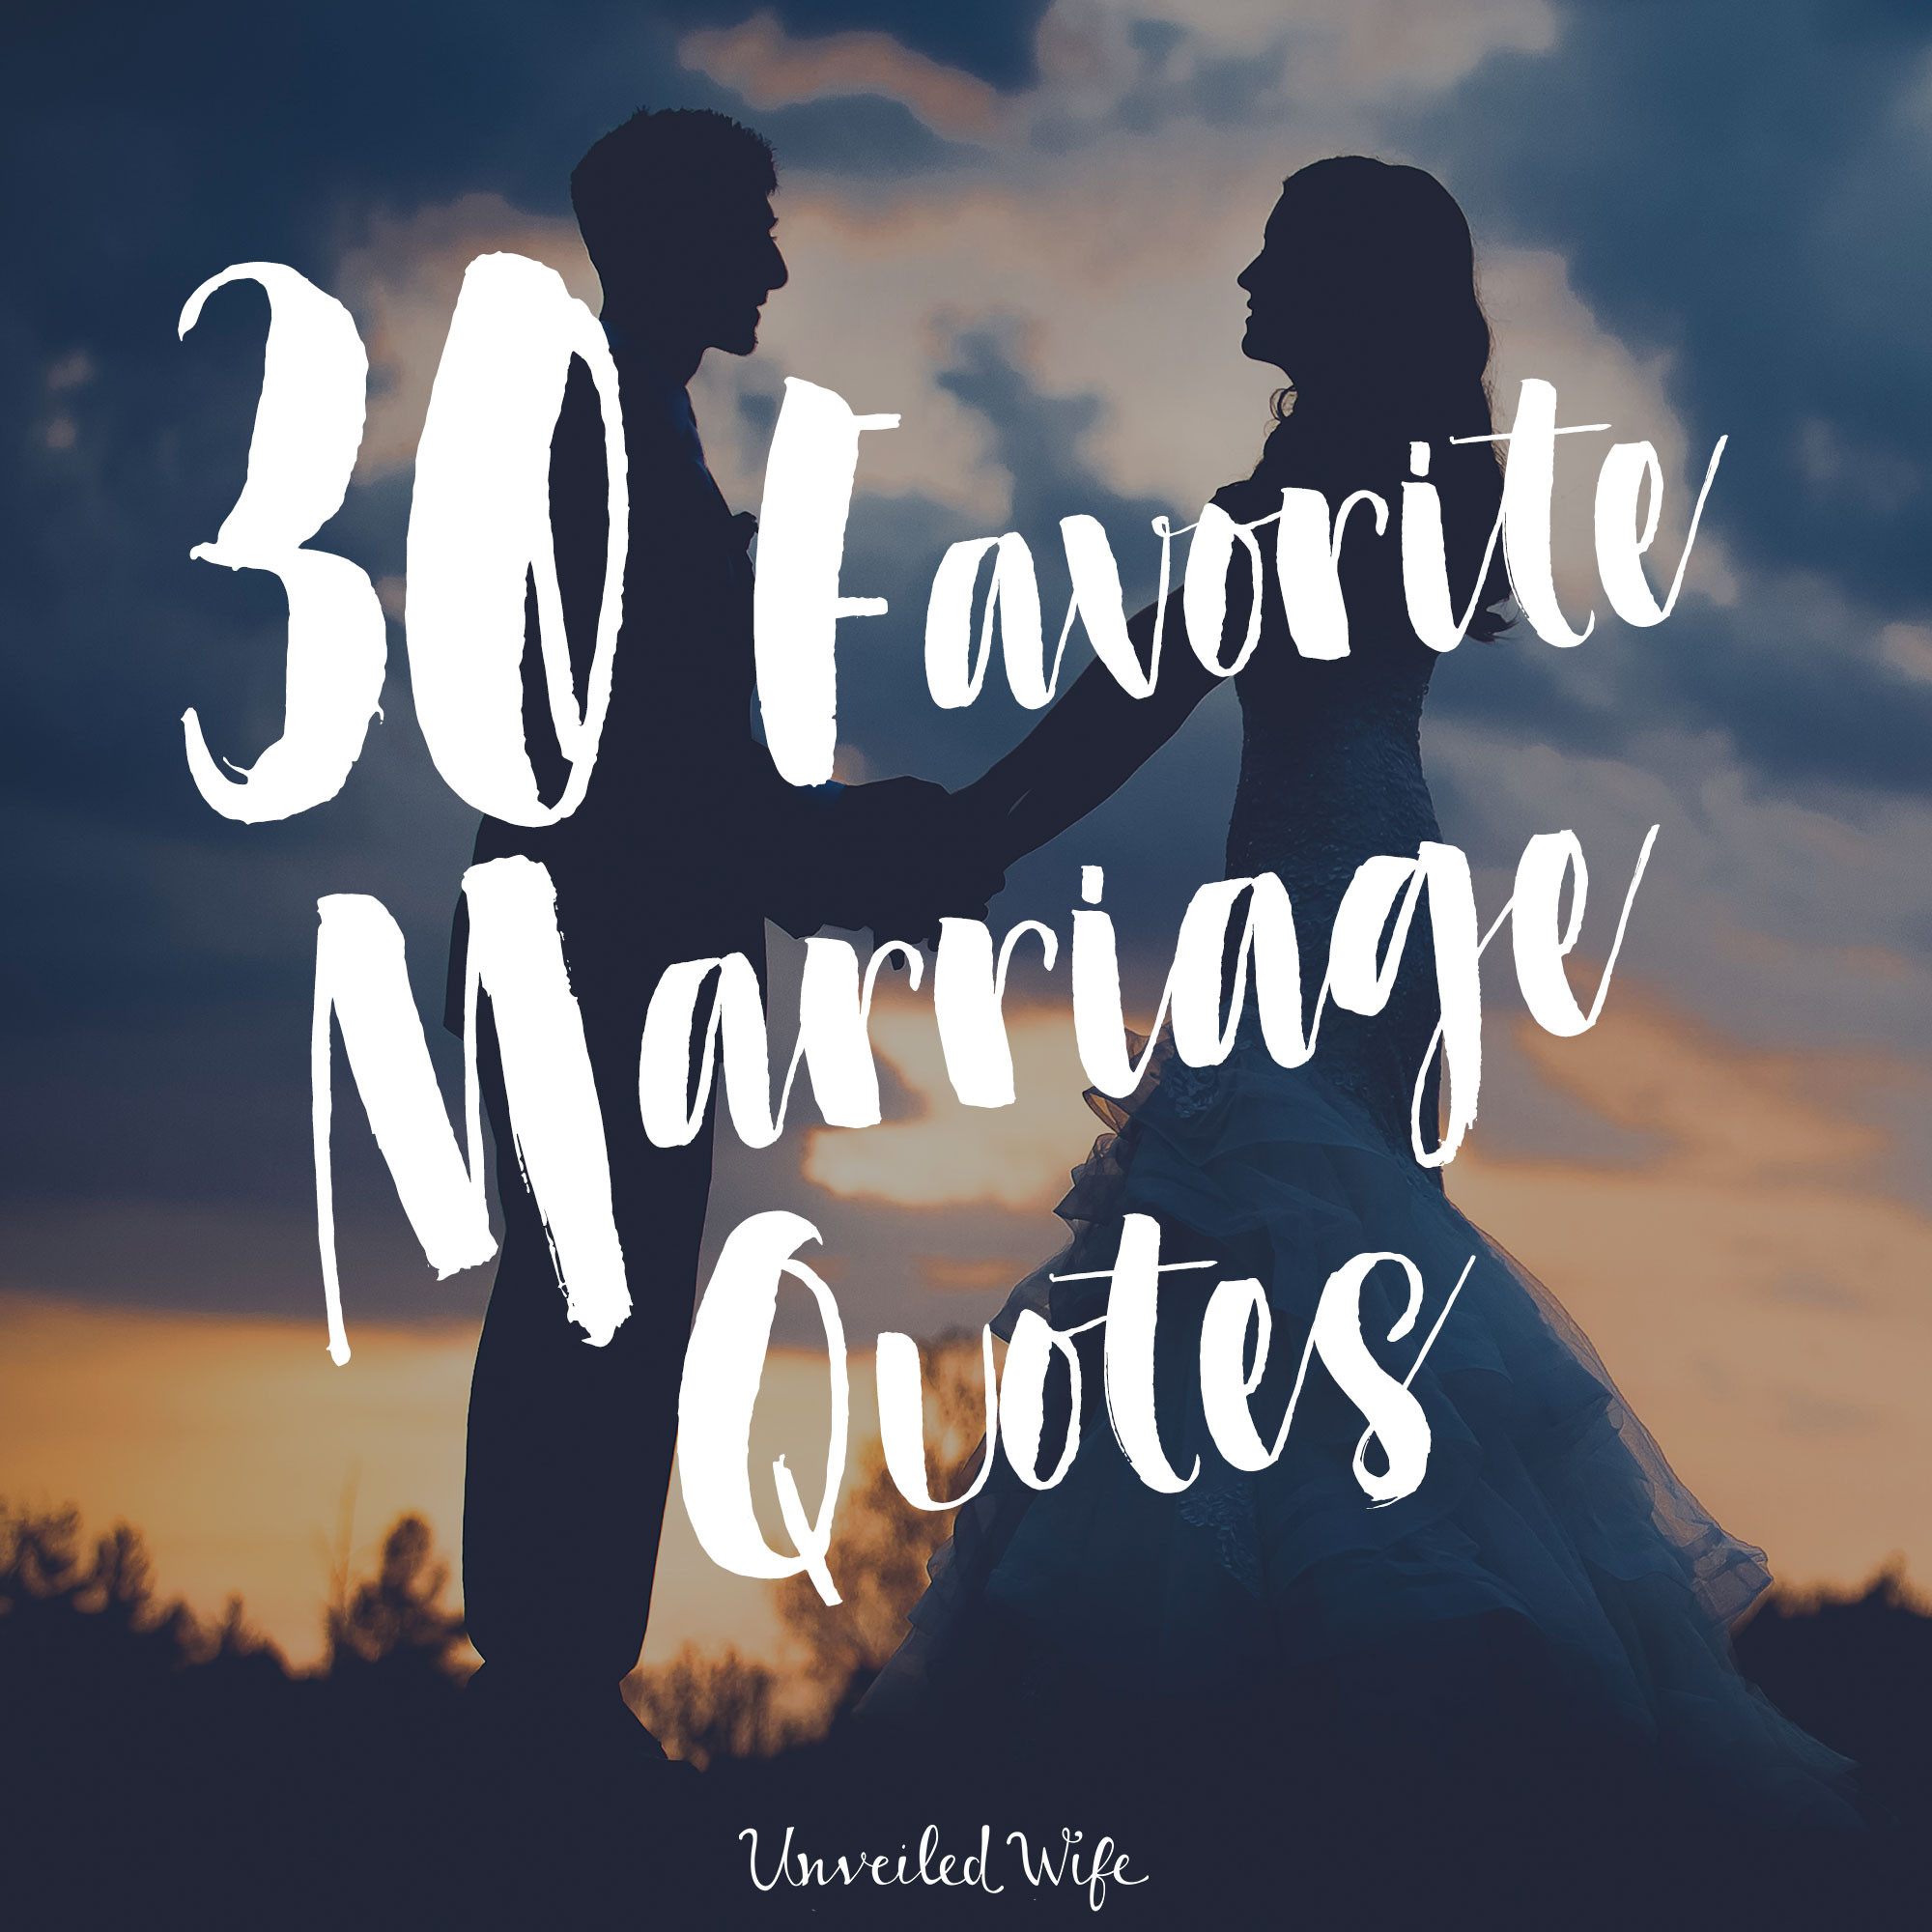 Bible Marriage Quotes
 30 Favorite Marriage Quotes & Bible Verses